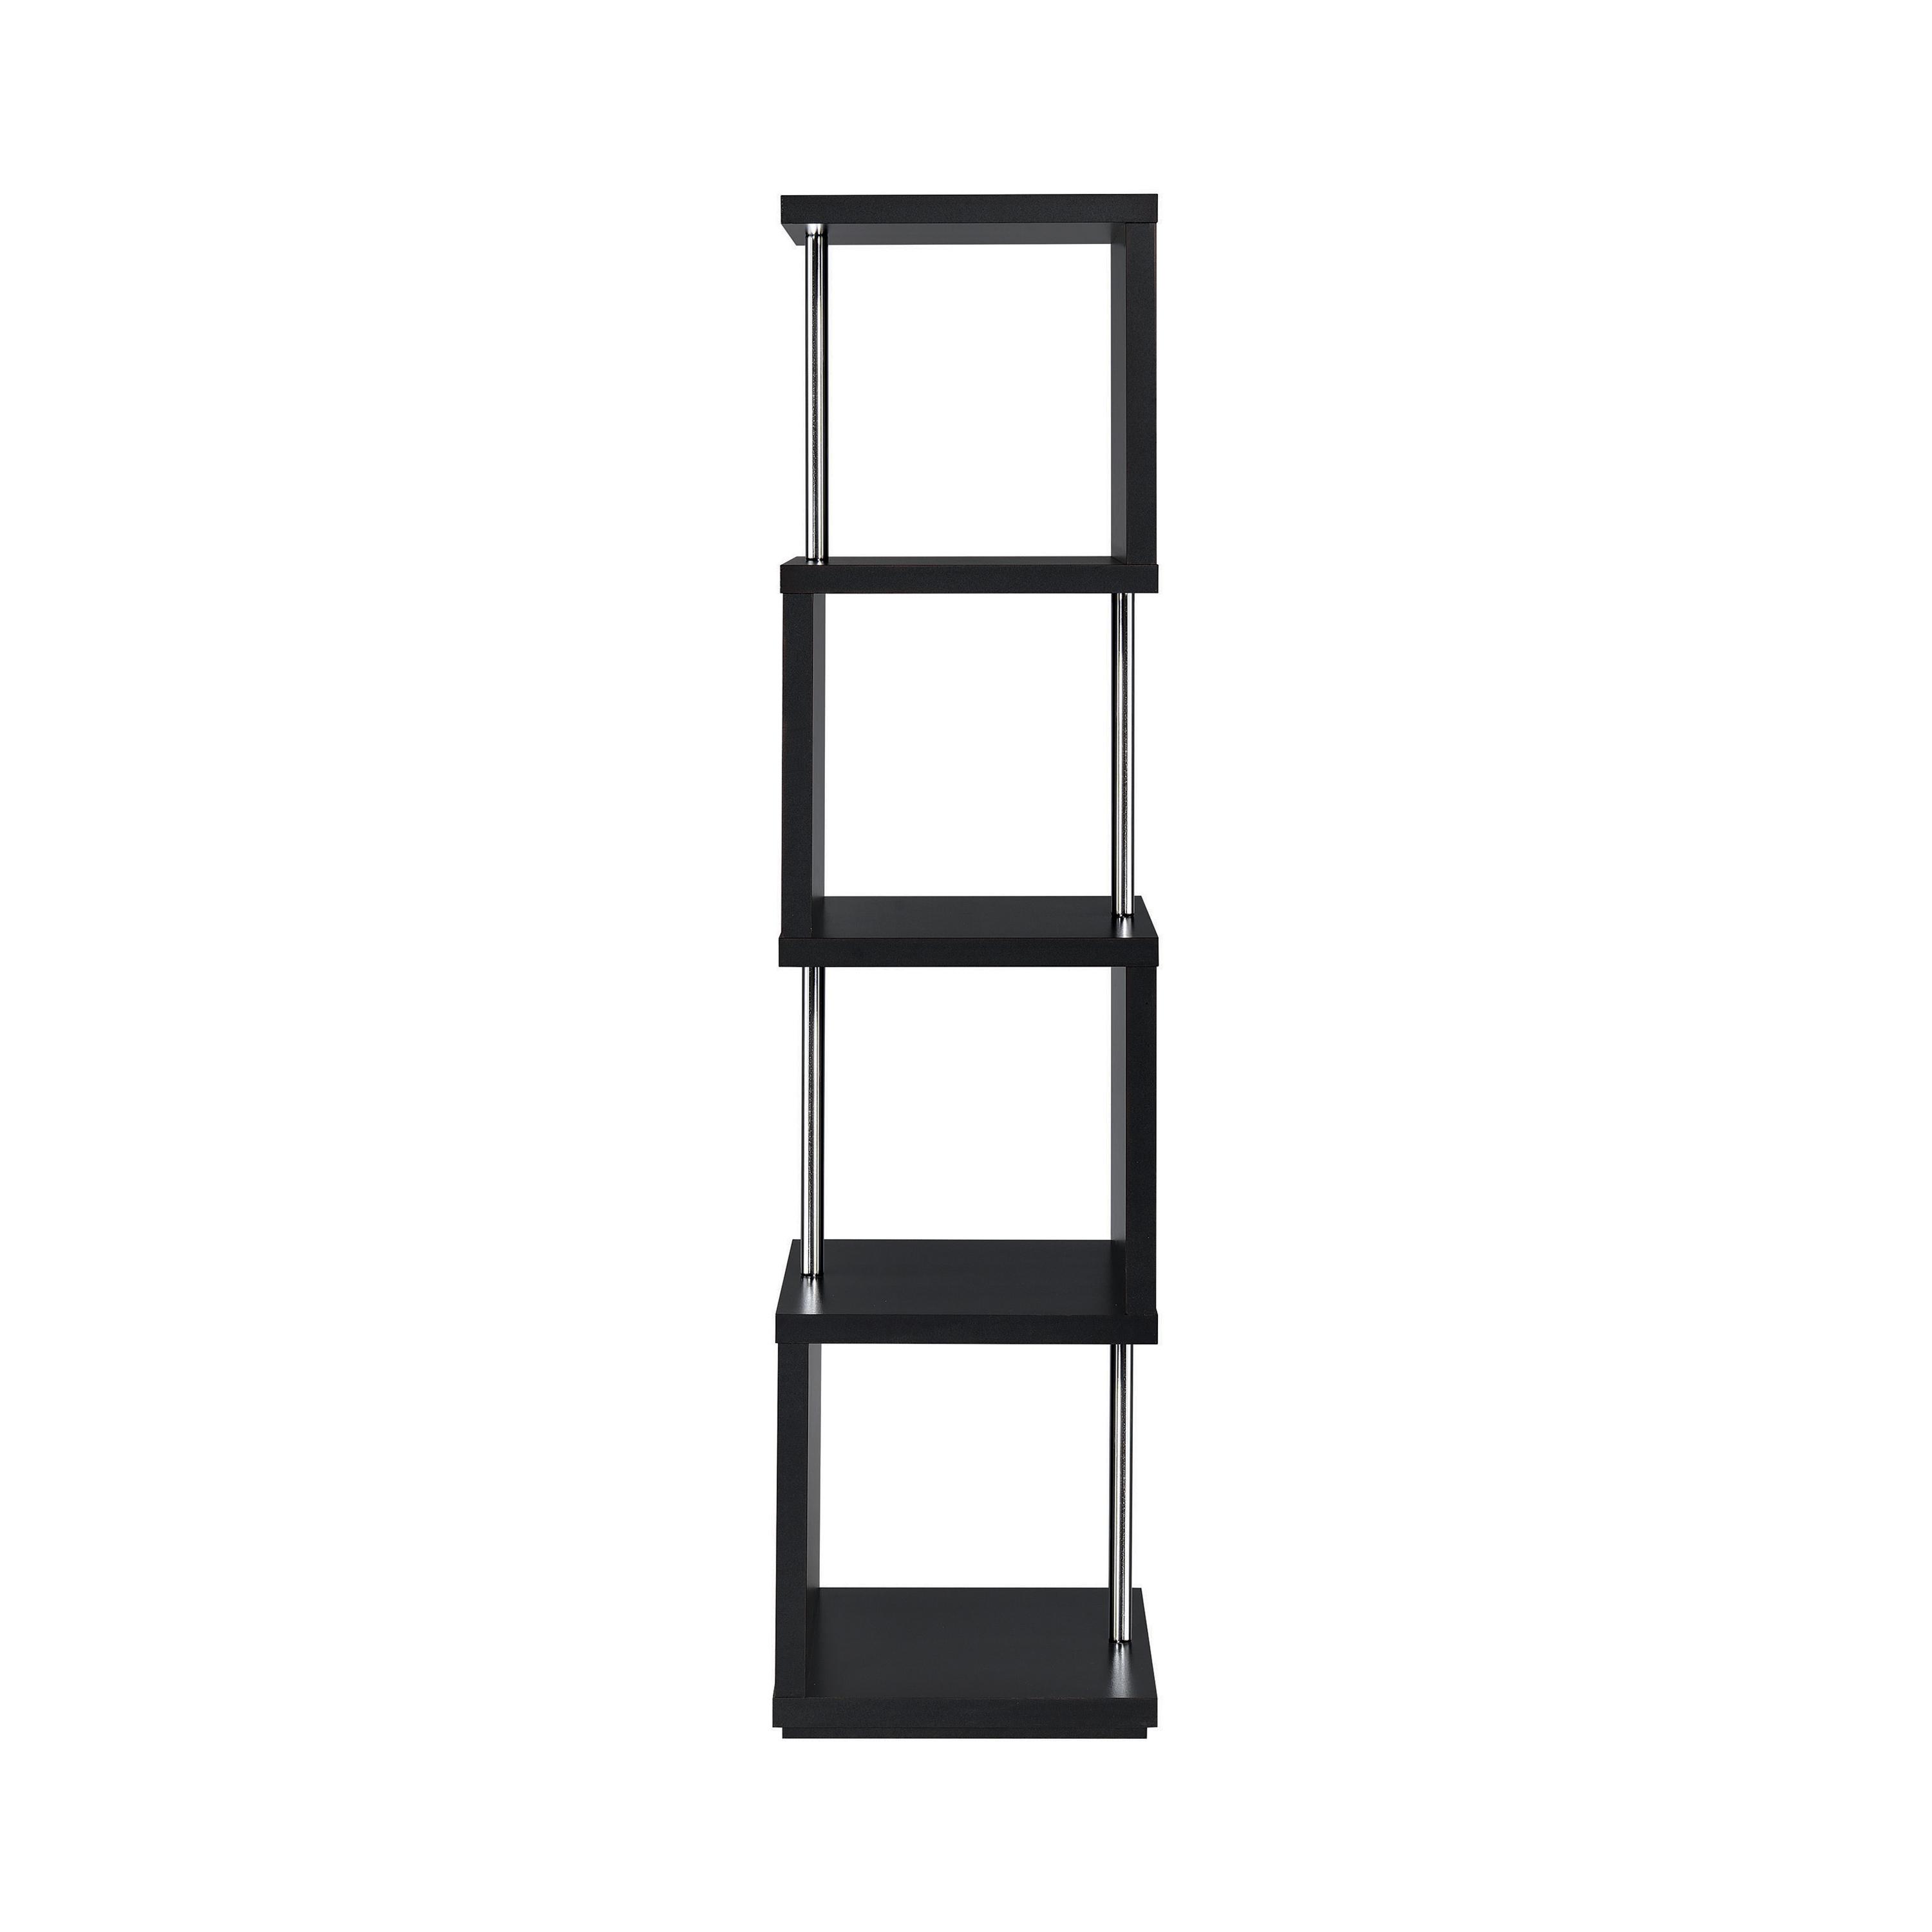 Contemporary Bookcase 801419 Baxter 801419 in Black 